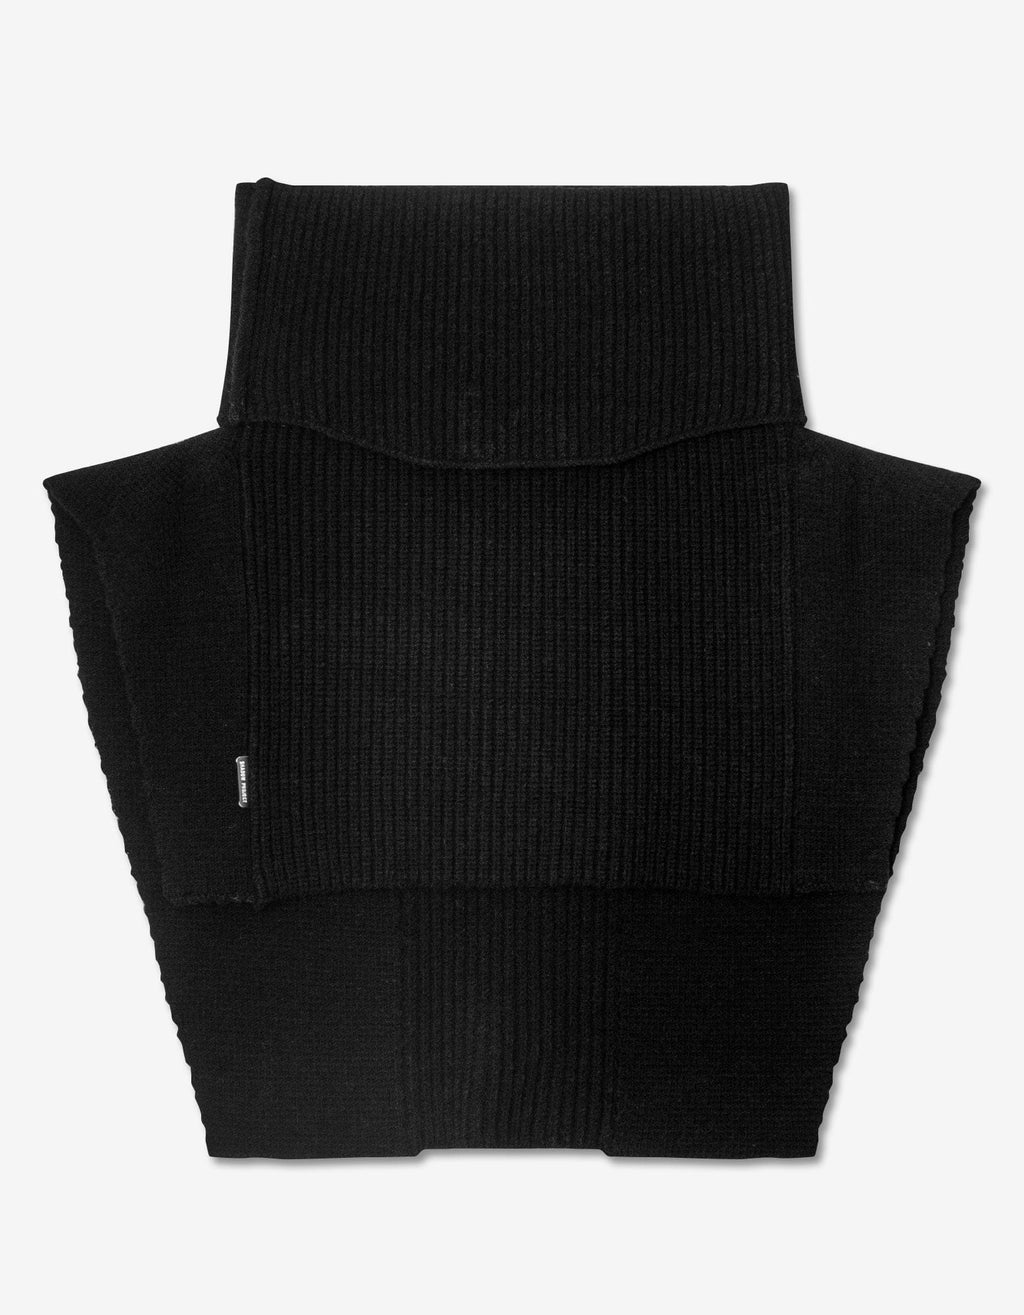 Stone Island Shadow Project Black Chapter 2 Neck Warmer